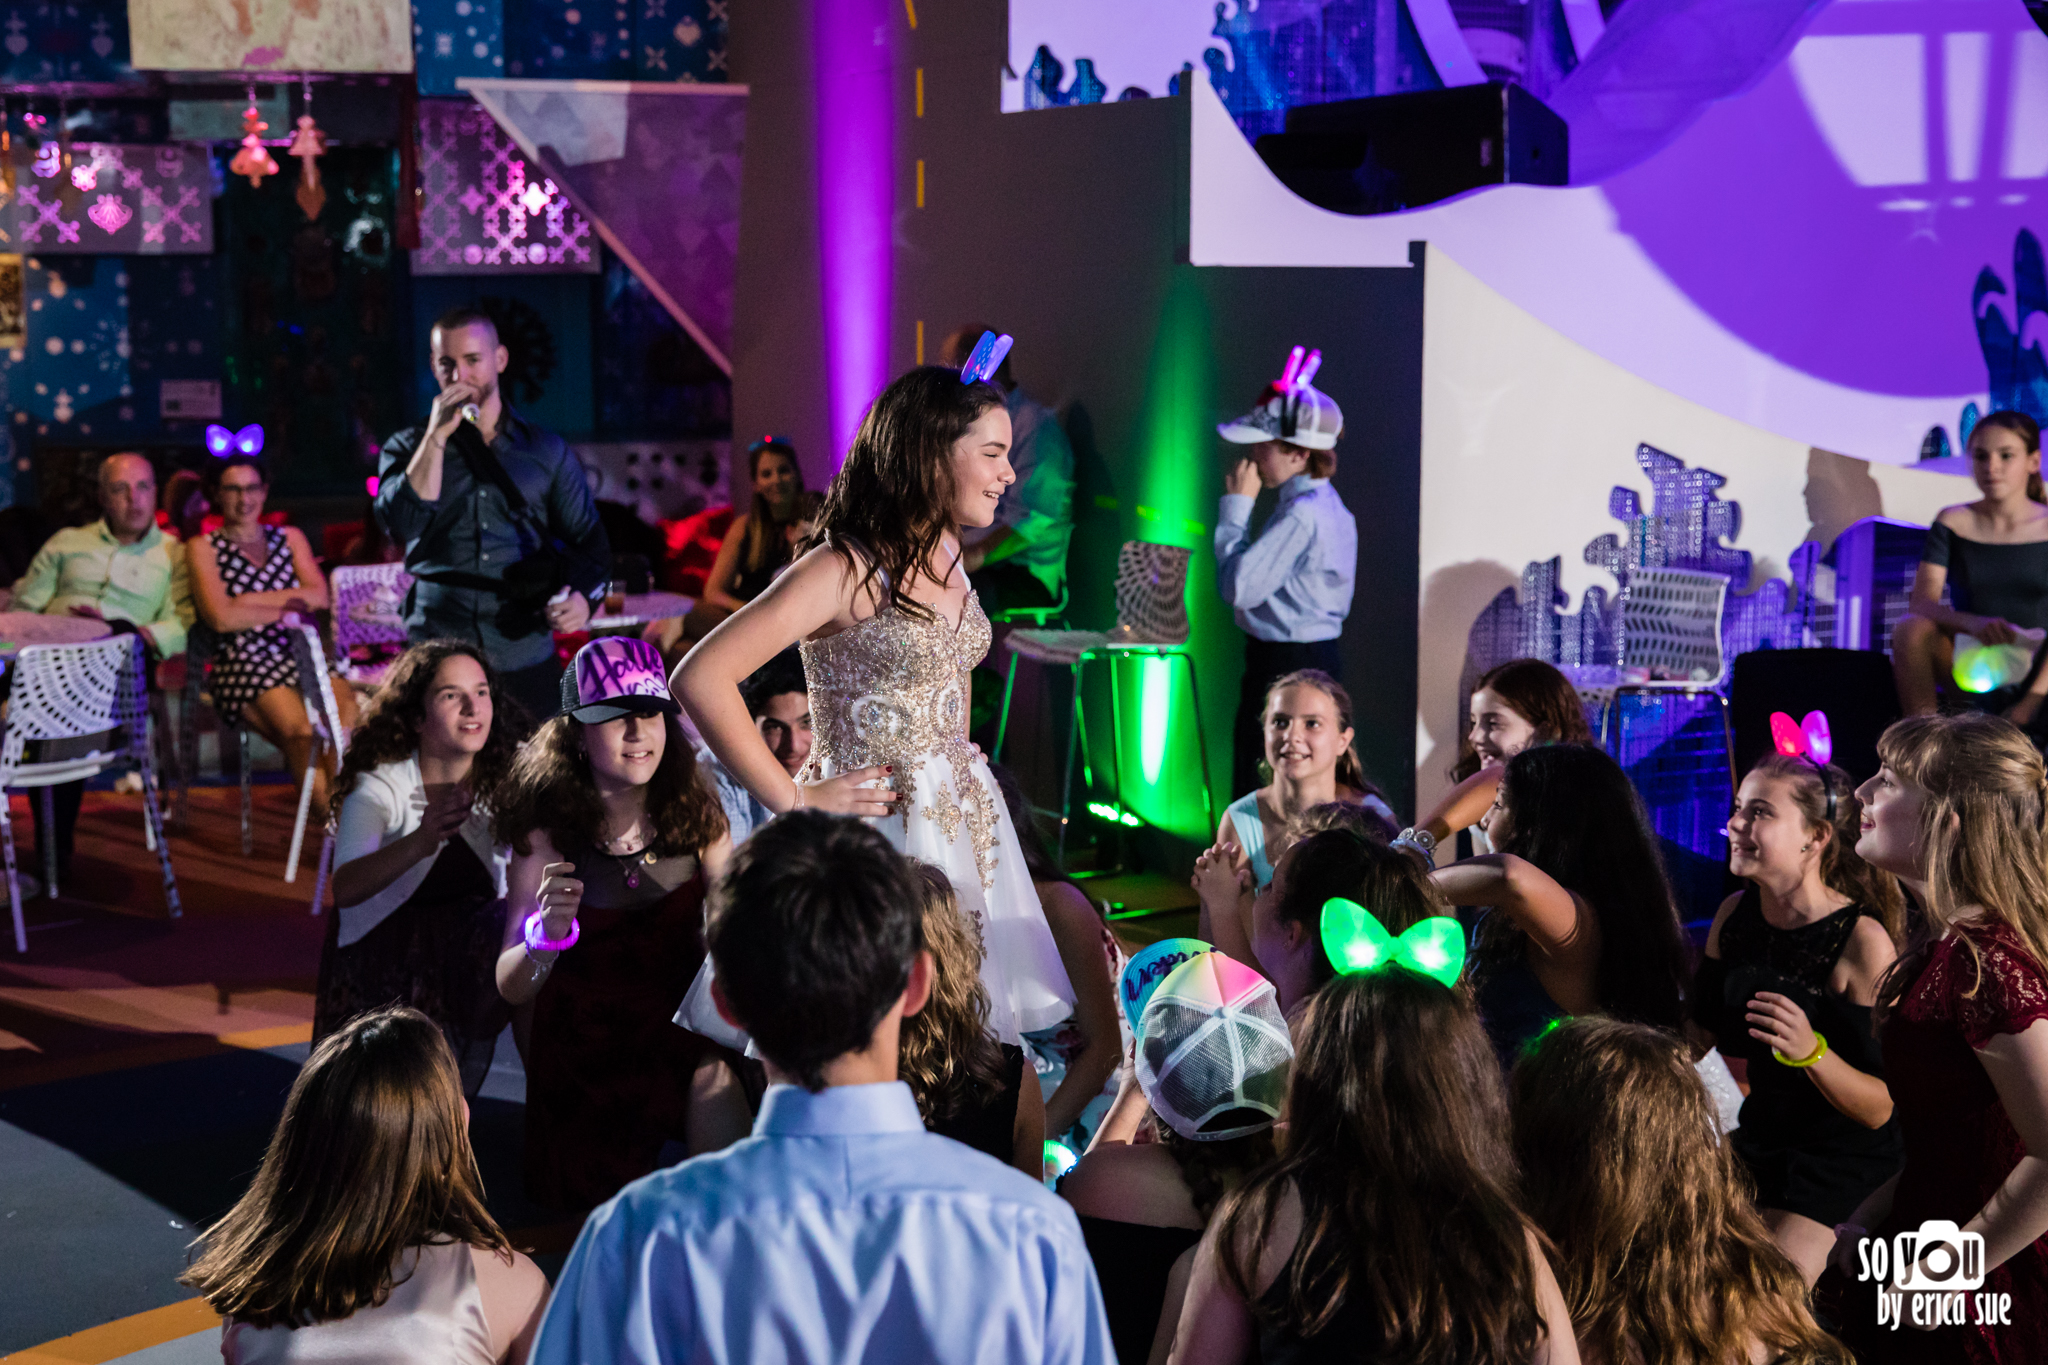 so-you-by-erica-sue-bar-bat-mitzvah-young-at-art-davie-fl-photography-5783.jpg